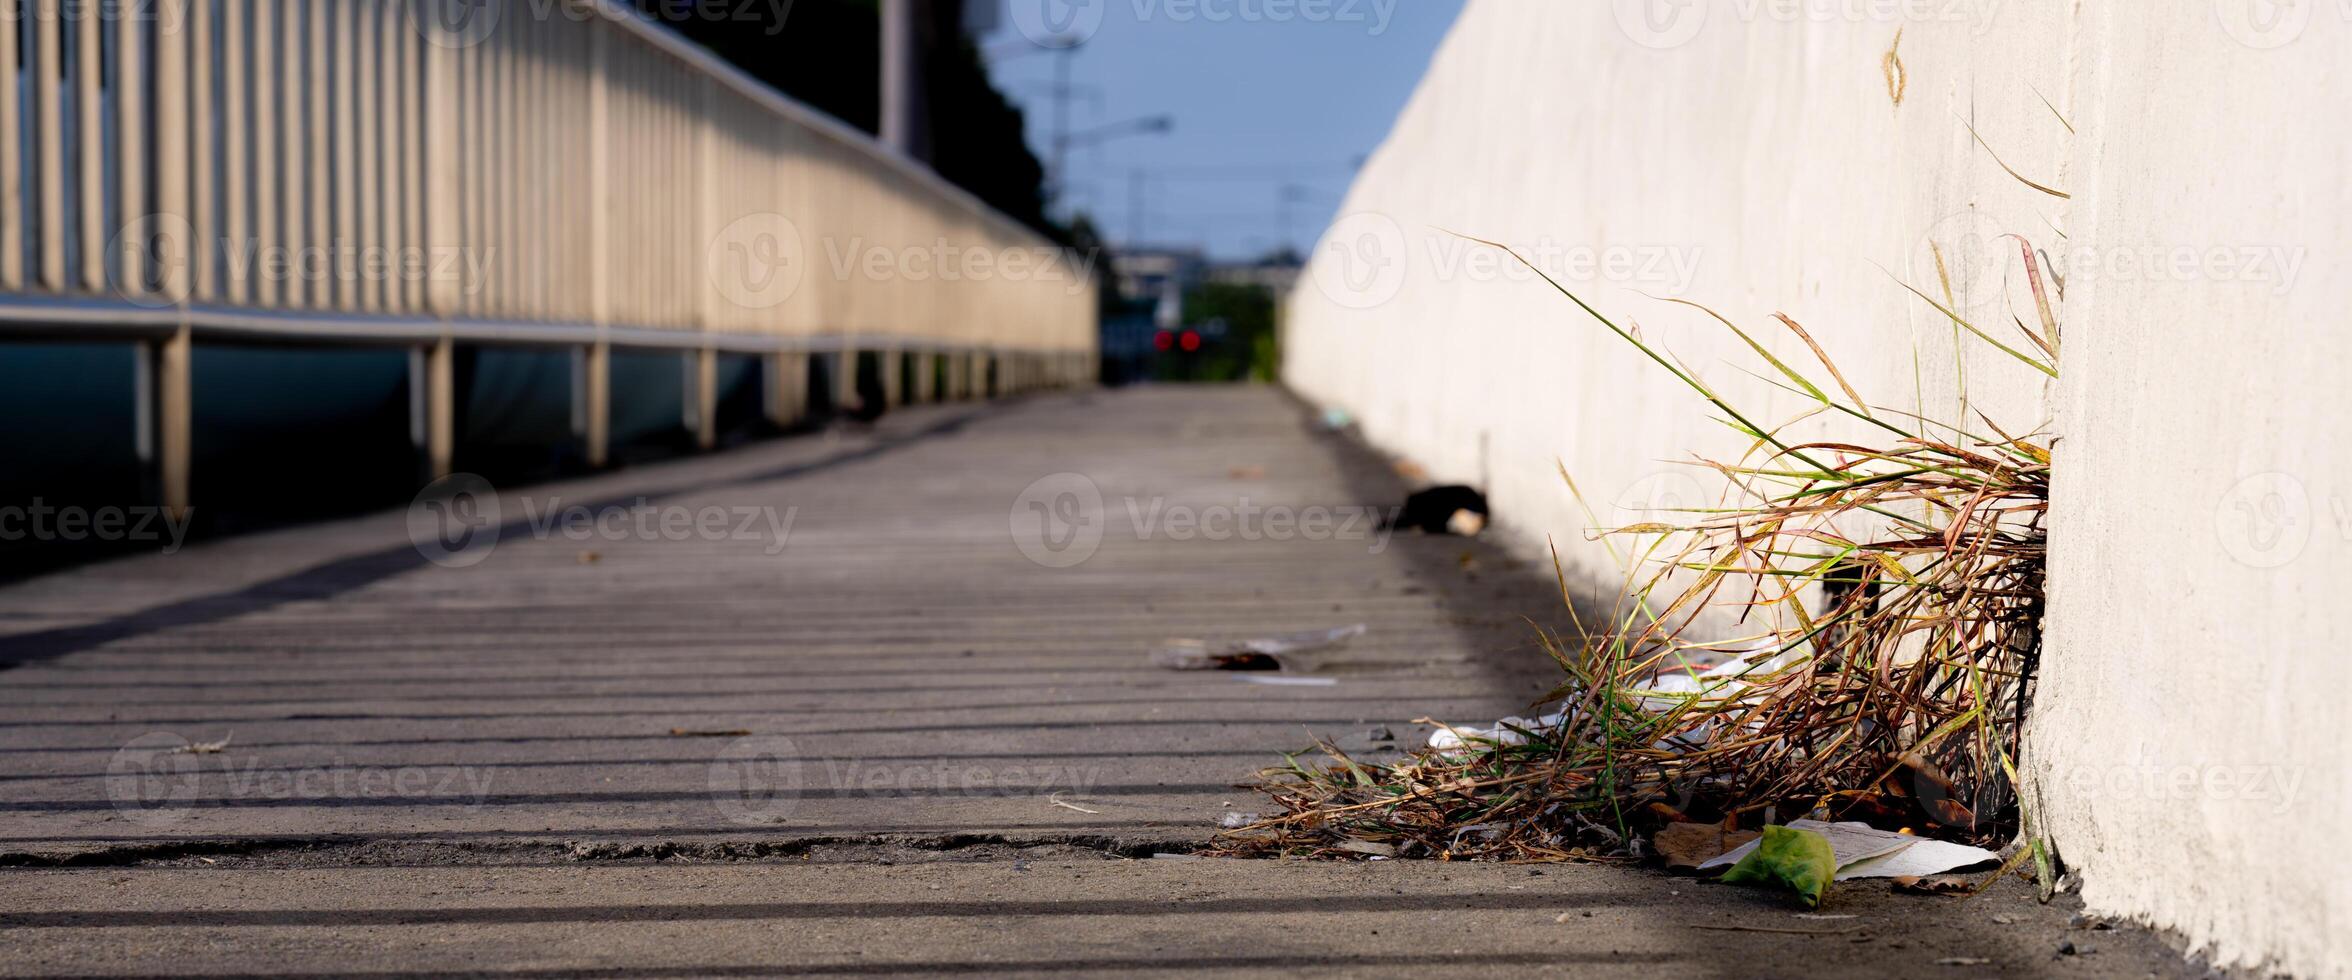 A wide low-angle view, A bridge or road with a fence, a grassy area with piles of debris on the walkway. photo